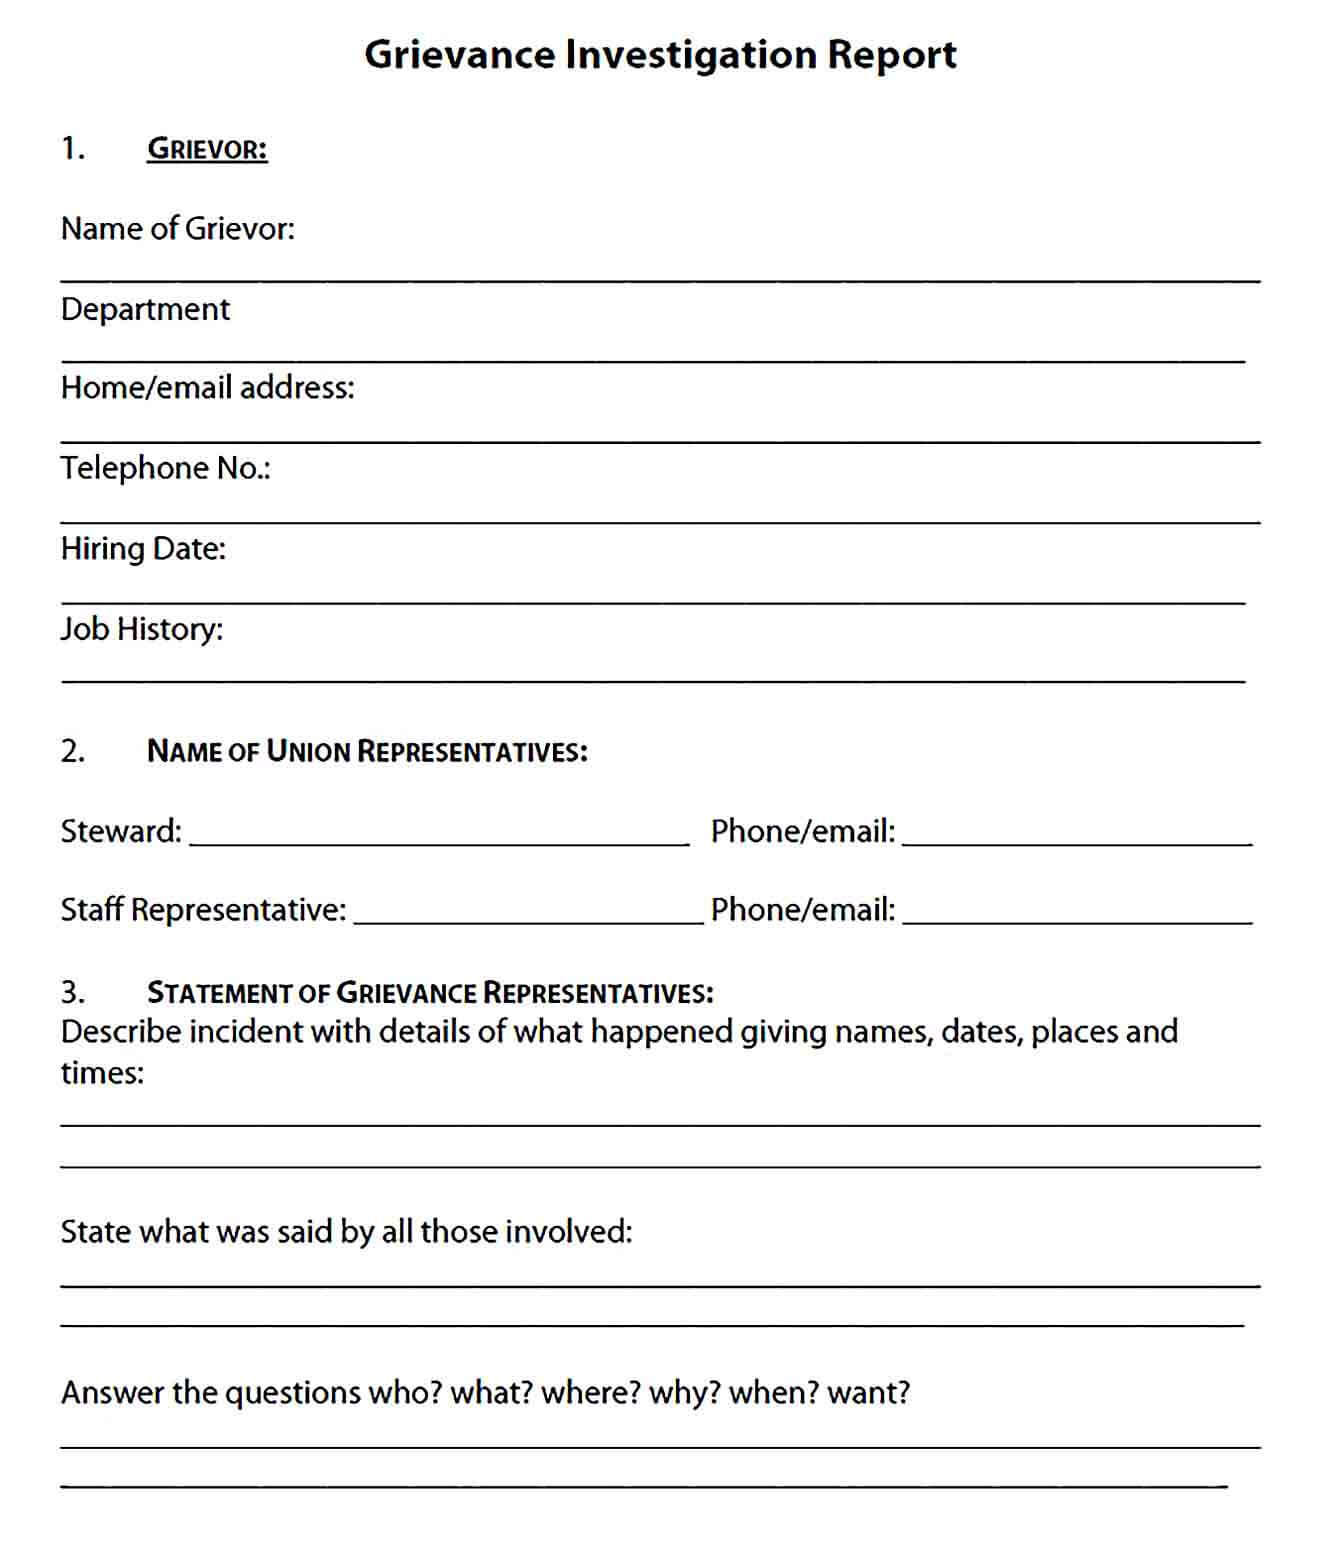 Sample Grievance Investigation Report Template